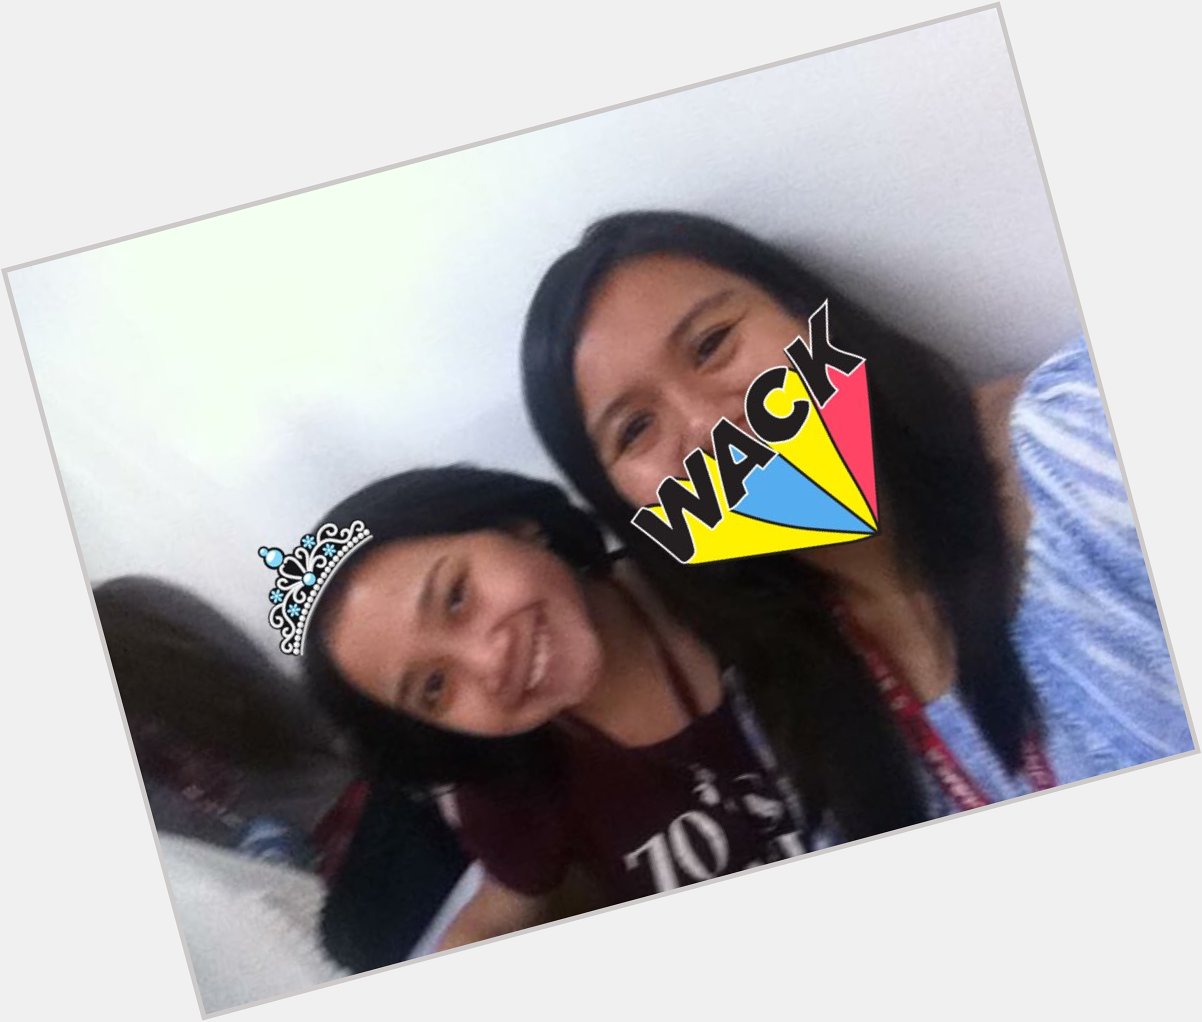 Happy birthday,  you are a strong person lam mo yan and i cant wait for u to conquer da world labyu 